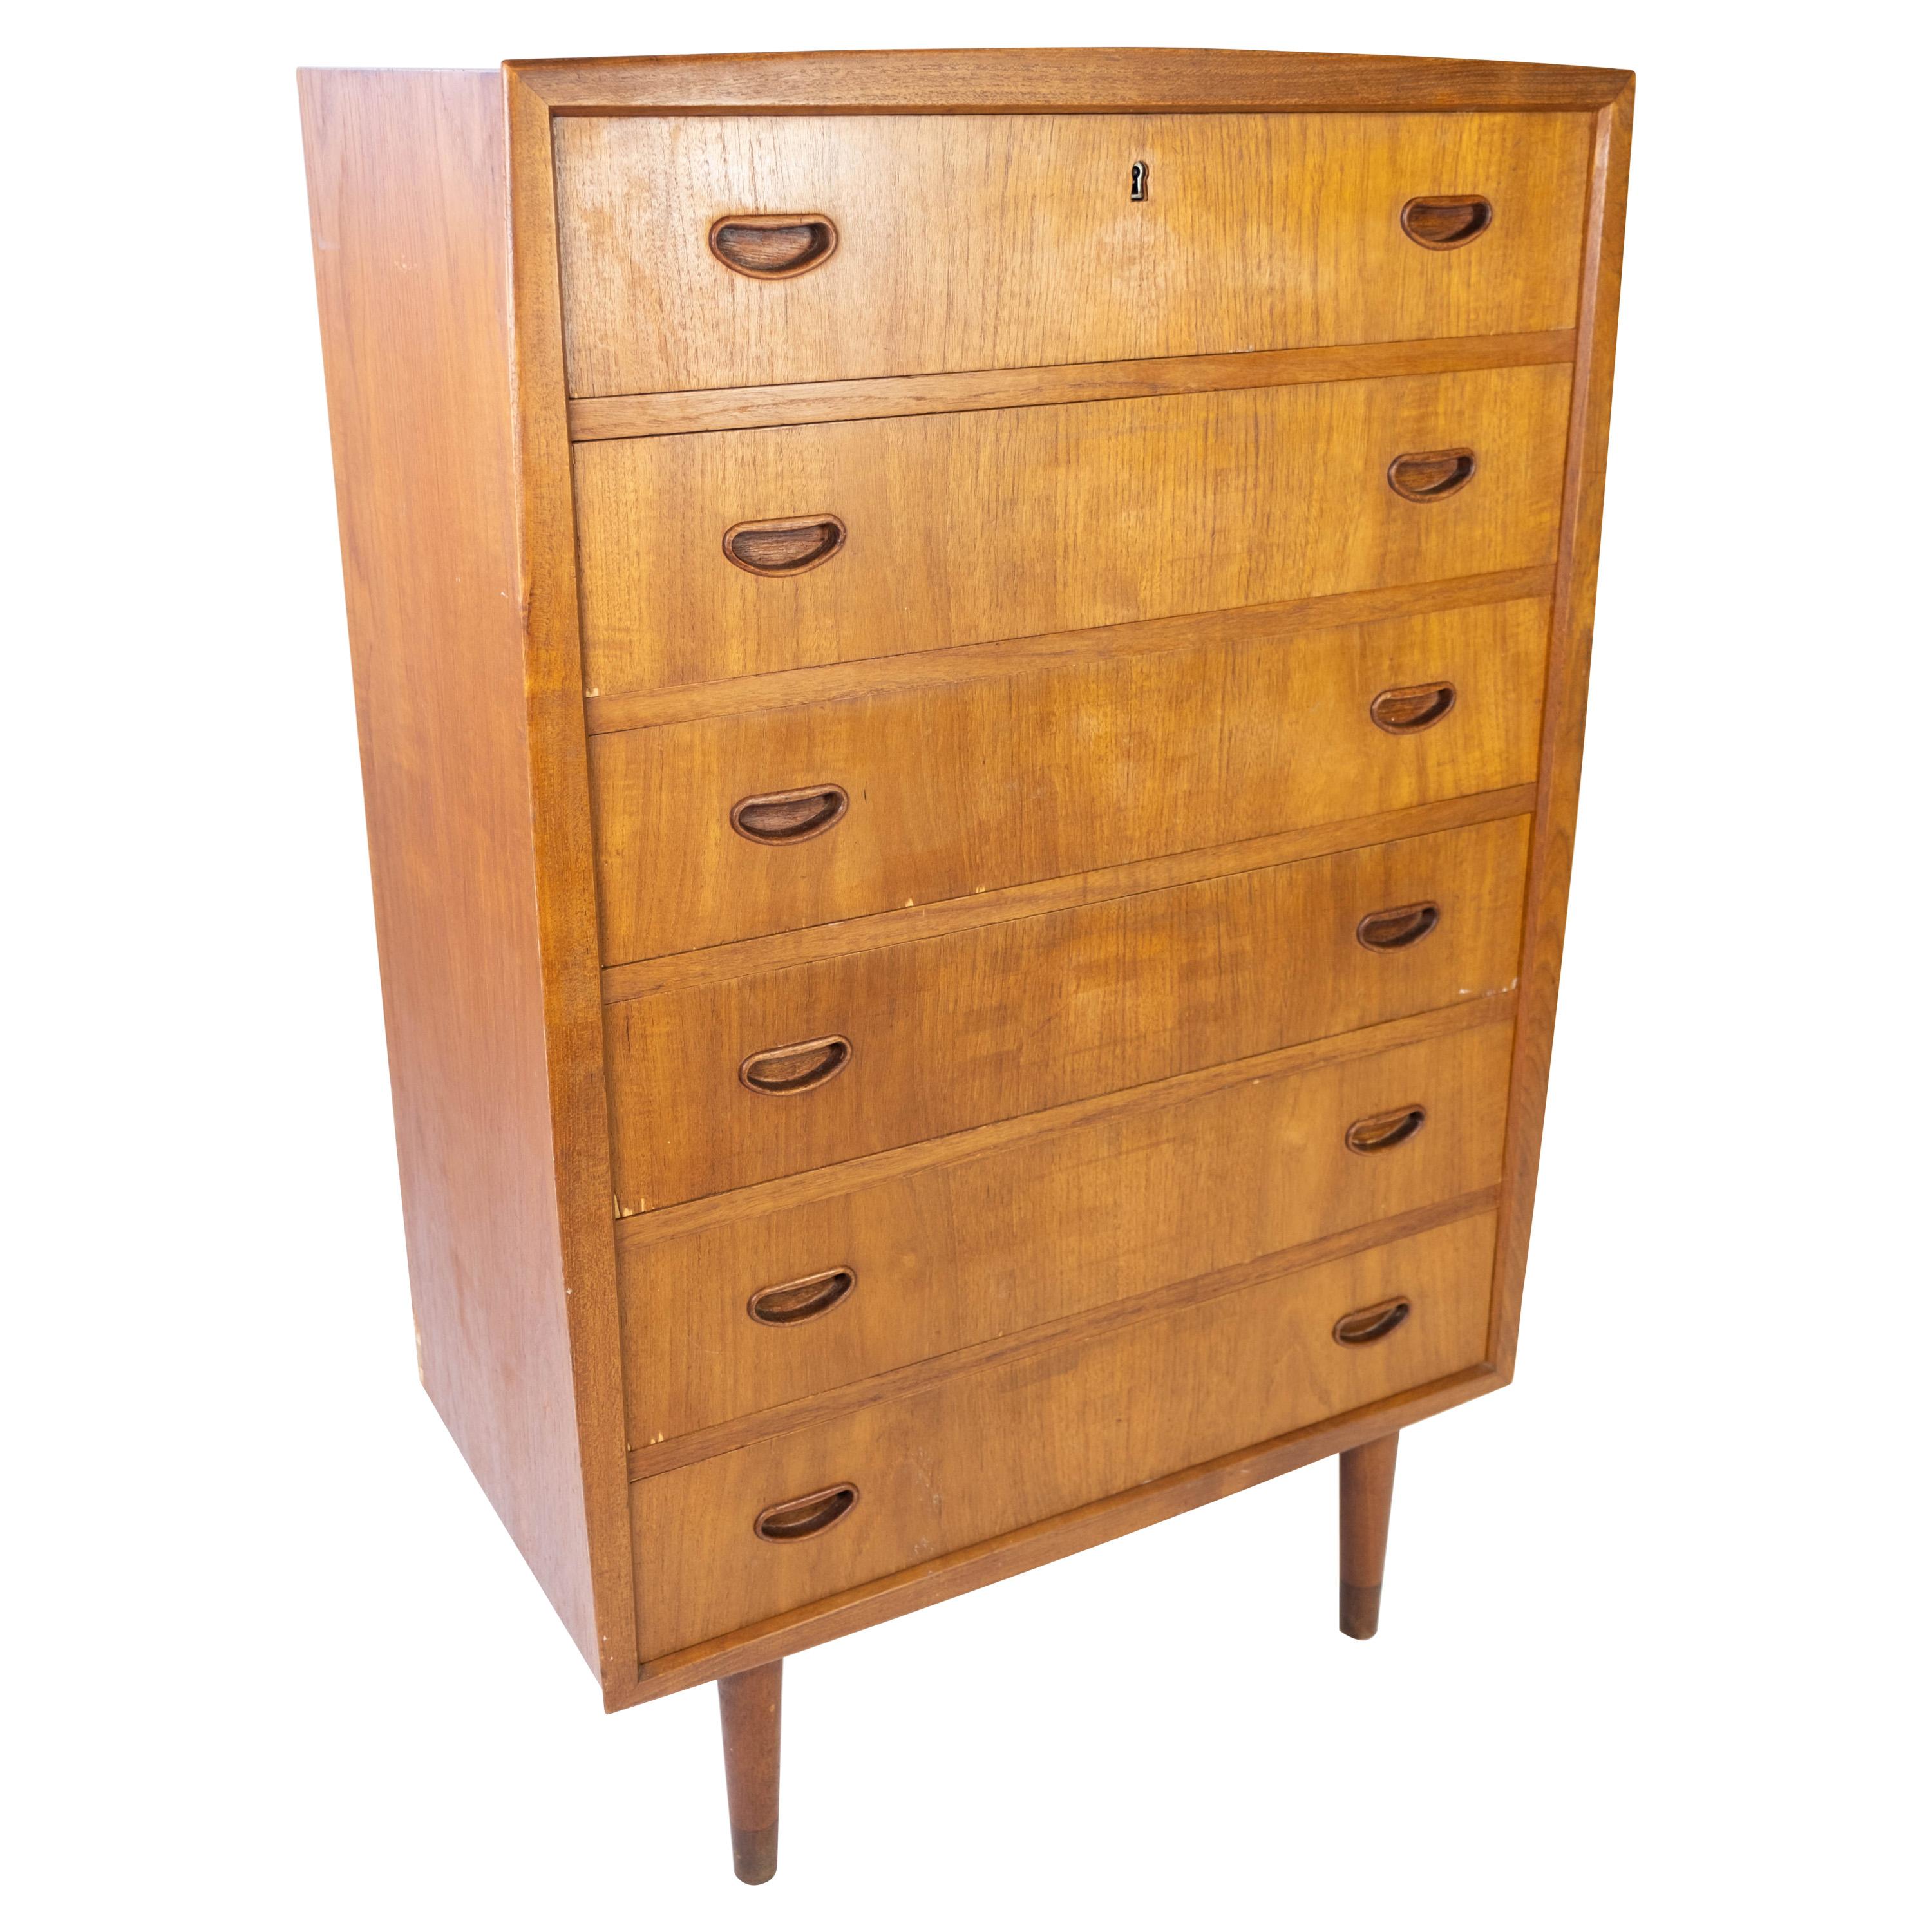 Chest of Drawers in Teak of Danish Design from the 1960s For Sale at 1stDibs